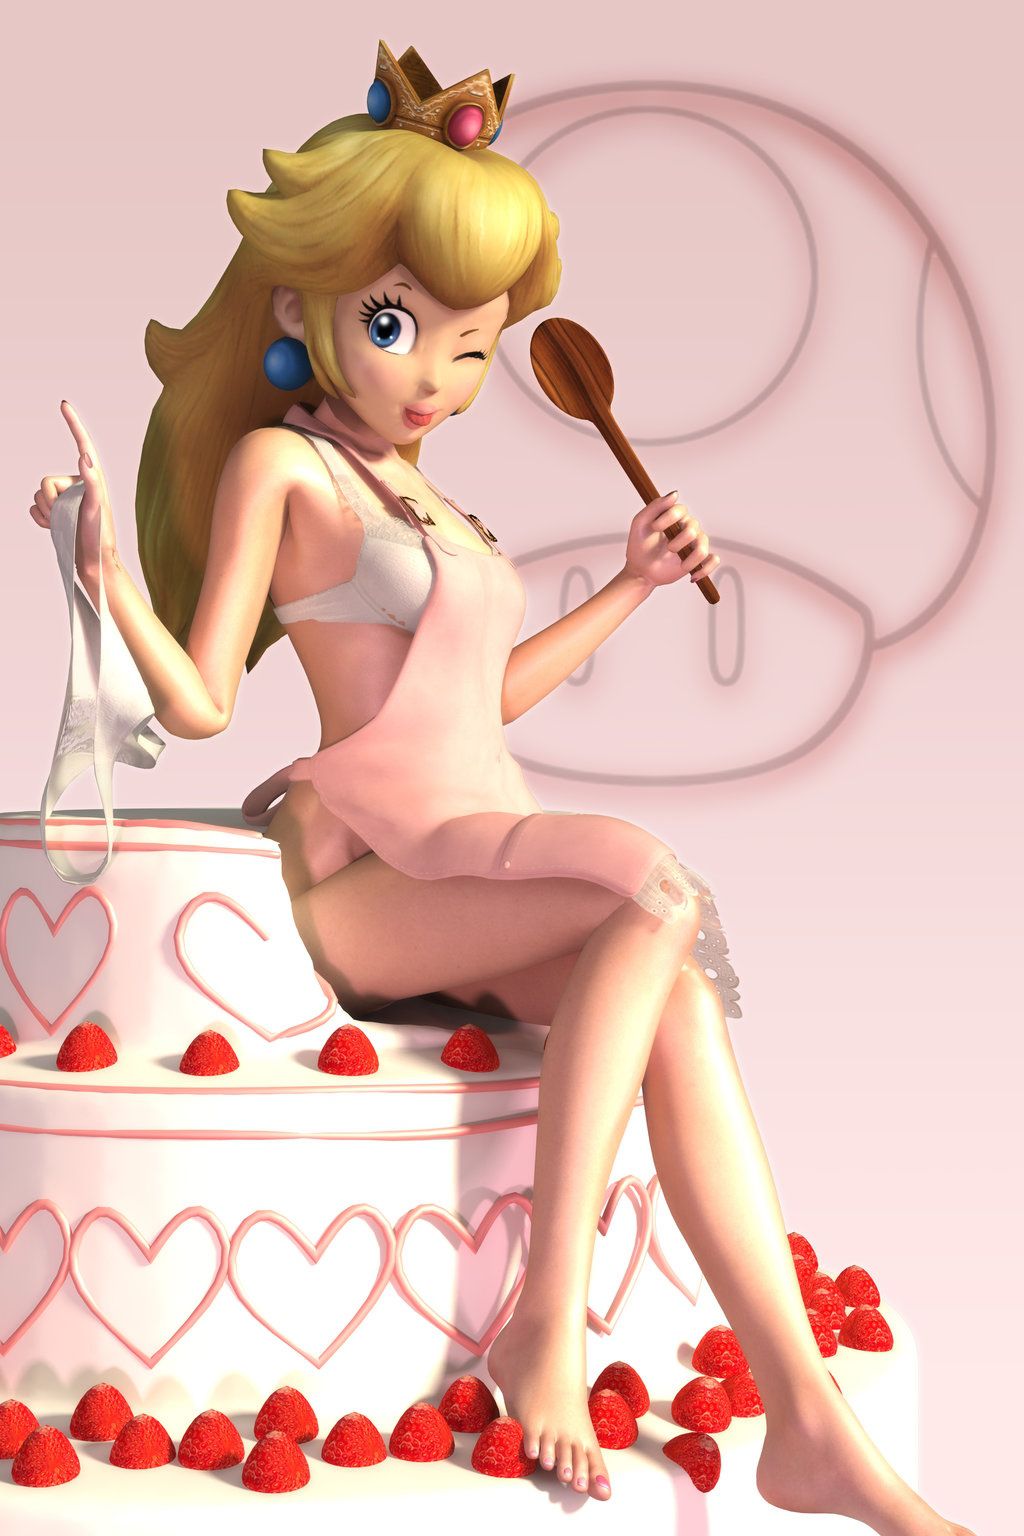 [Secondary] erotic image of the rare Princess Peach that is abducted willingly every time the violent sex of Bowser is not forgotten 2